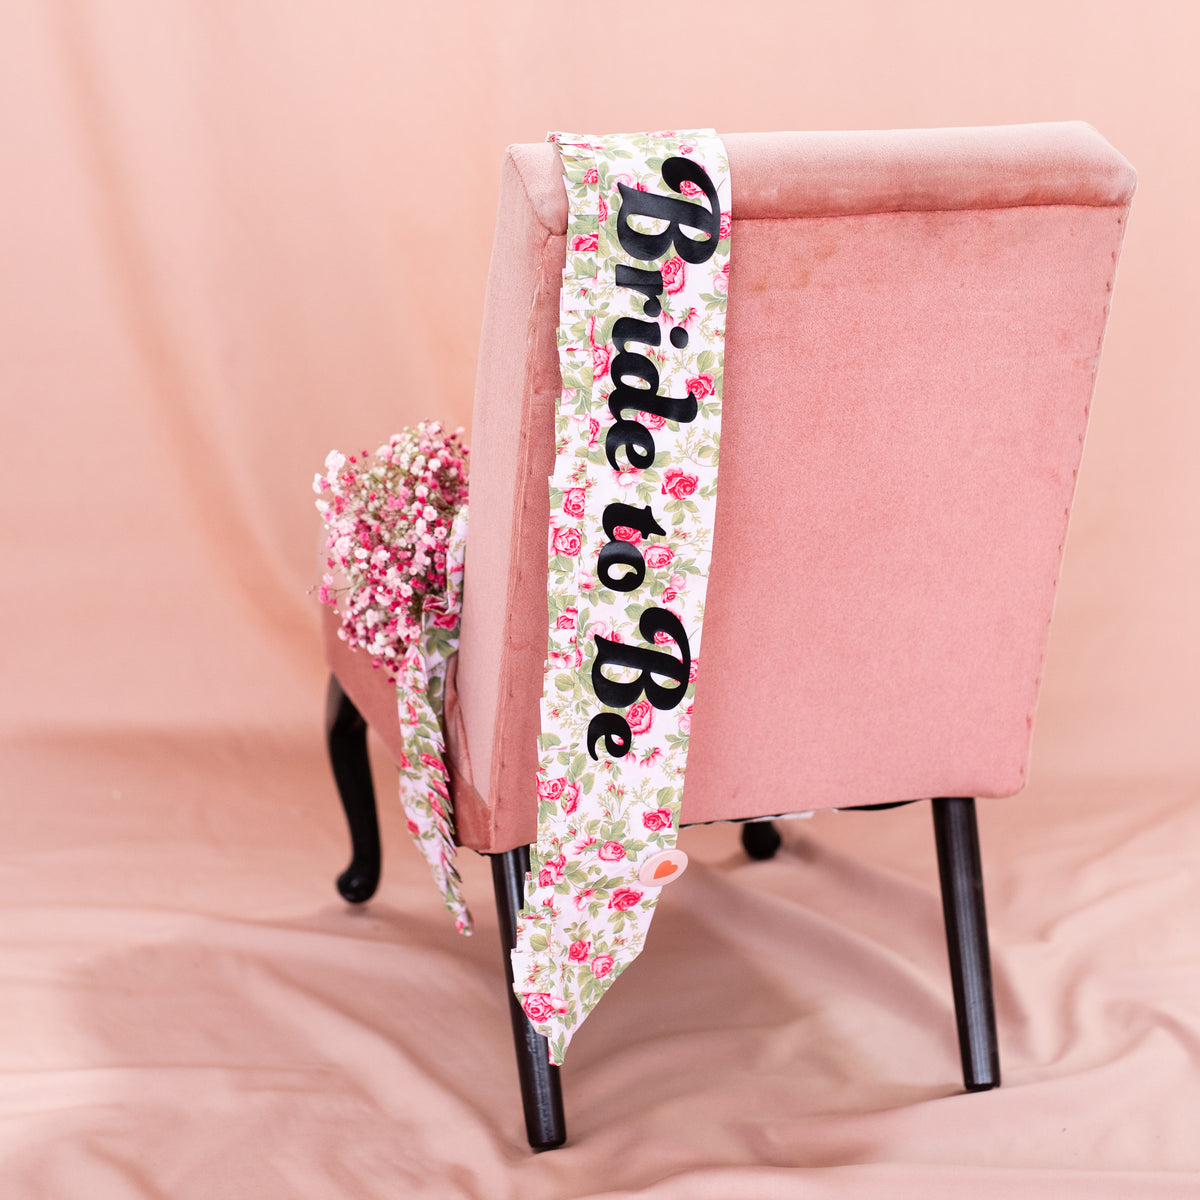 Ruffle Edge Rose Print Hen Party Sash - Personalisation available